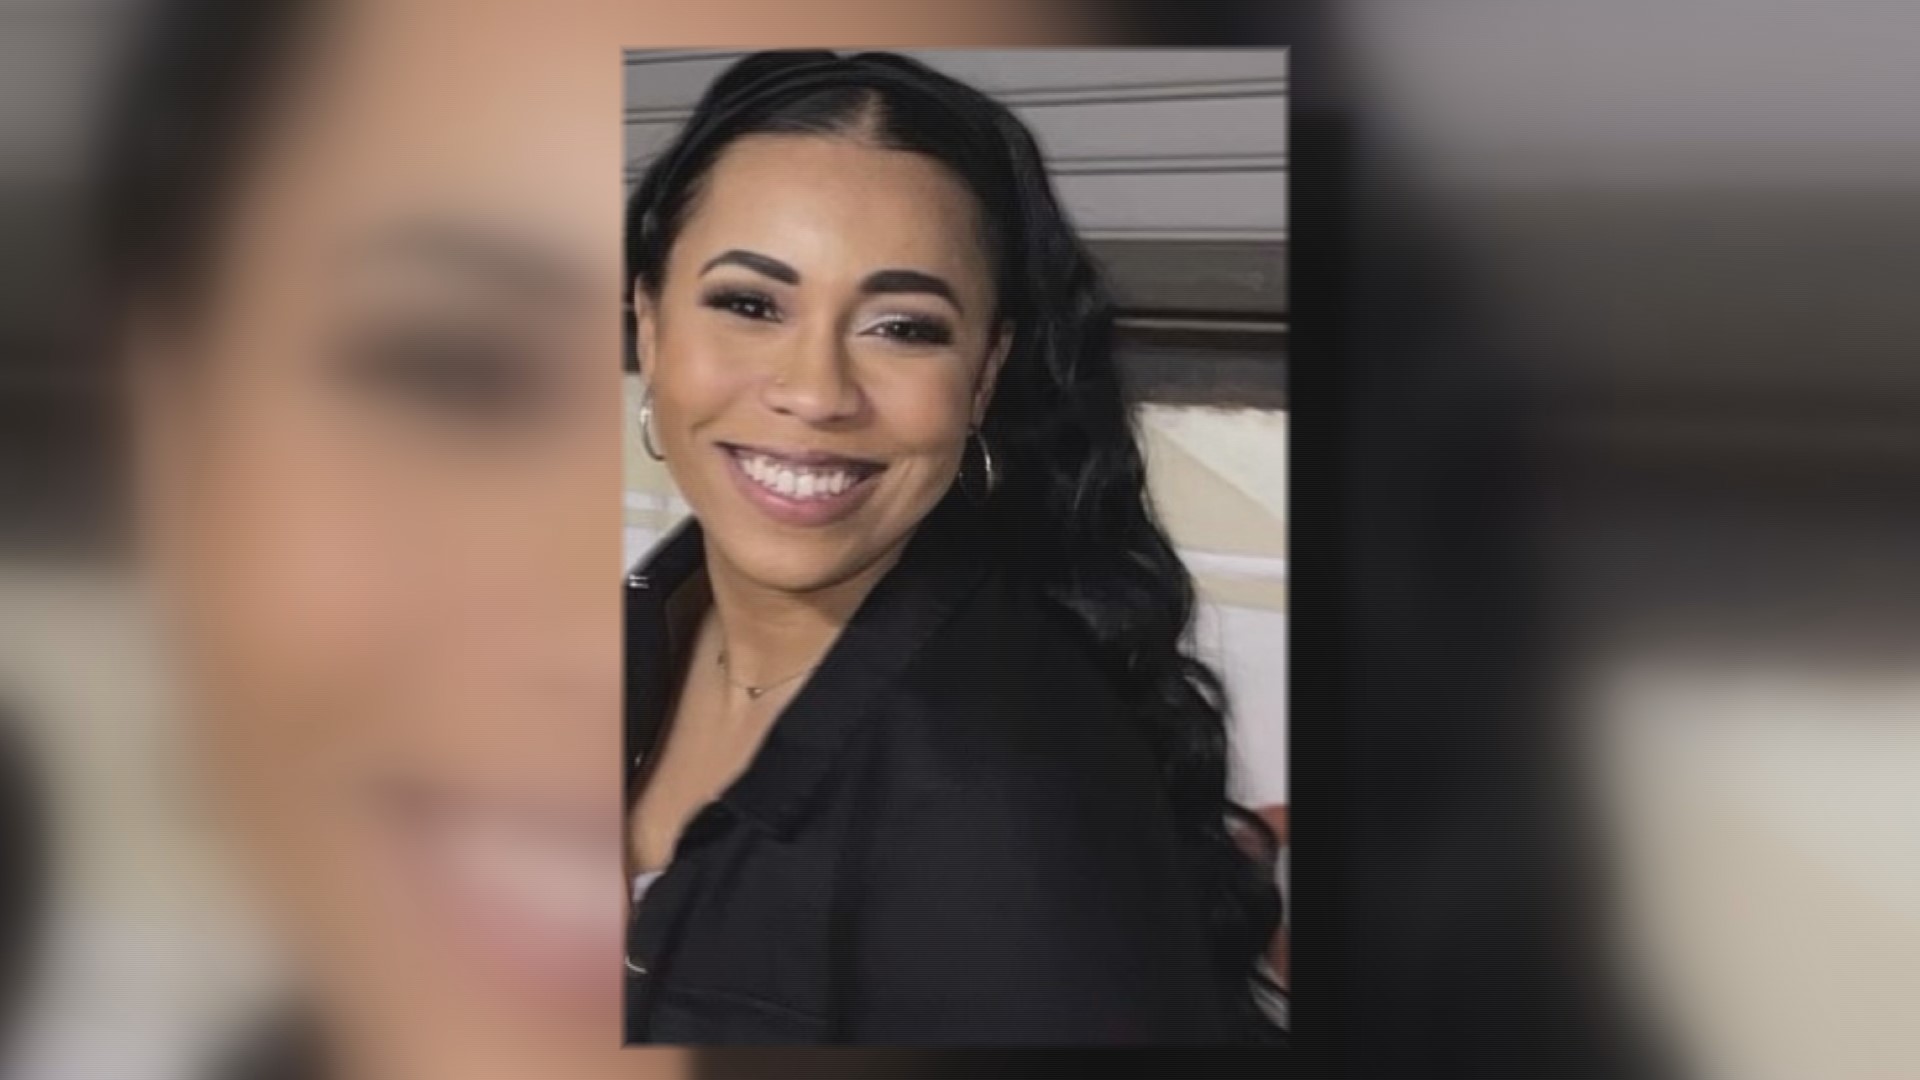 Allahnia Lenoir Missing Update: Georgia Woman Missing Since July Was Likely Murdered & Dumped at Unknown Location